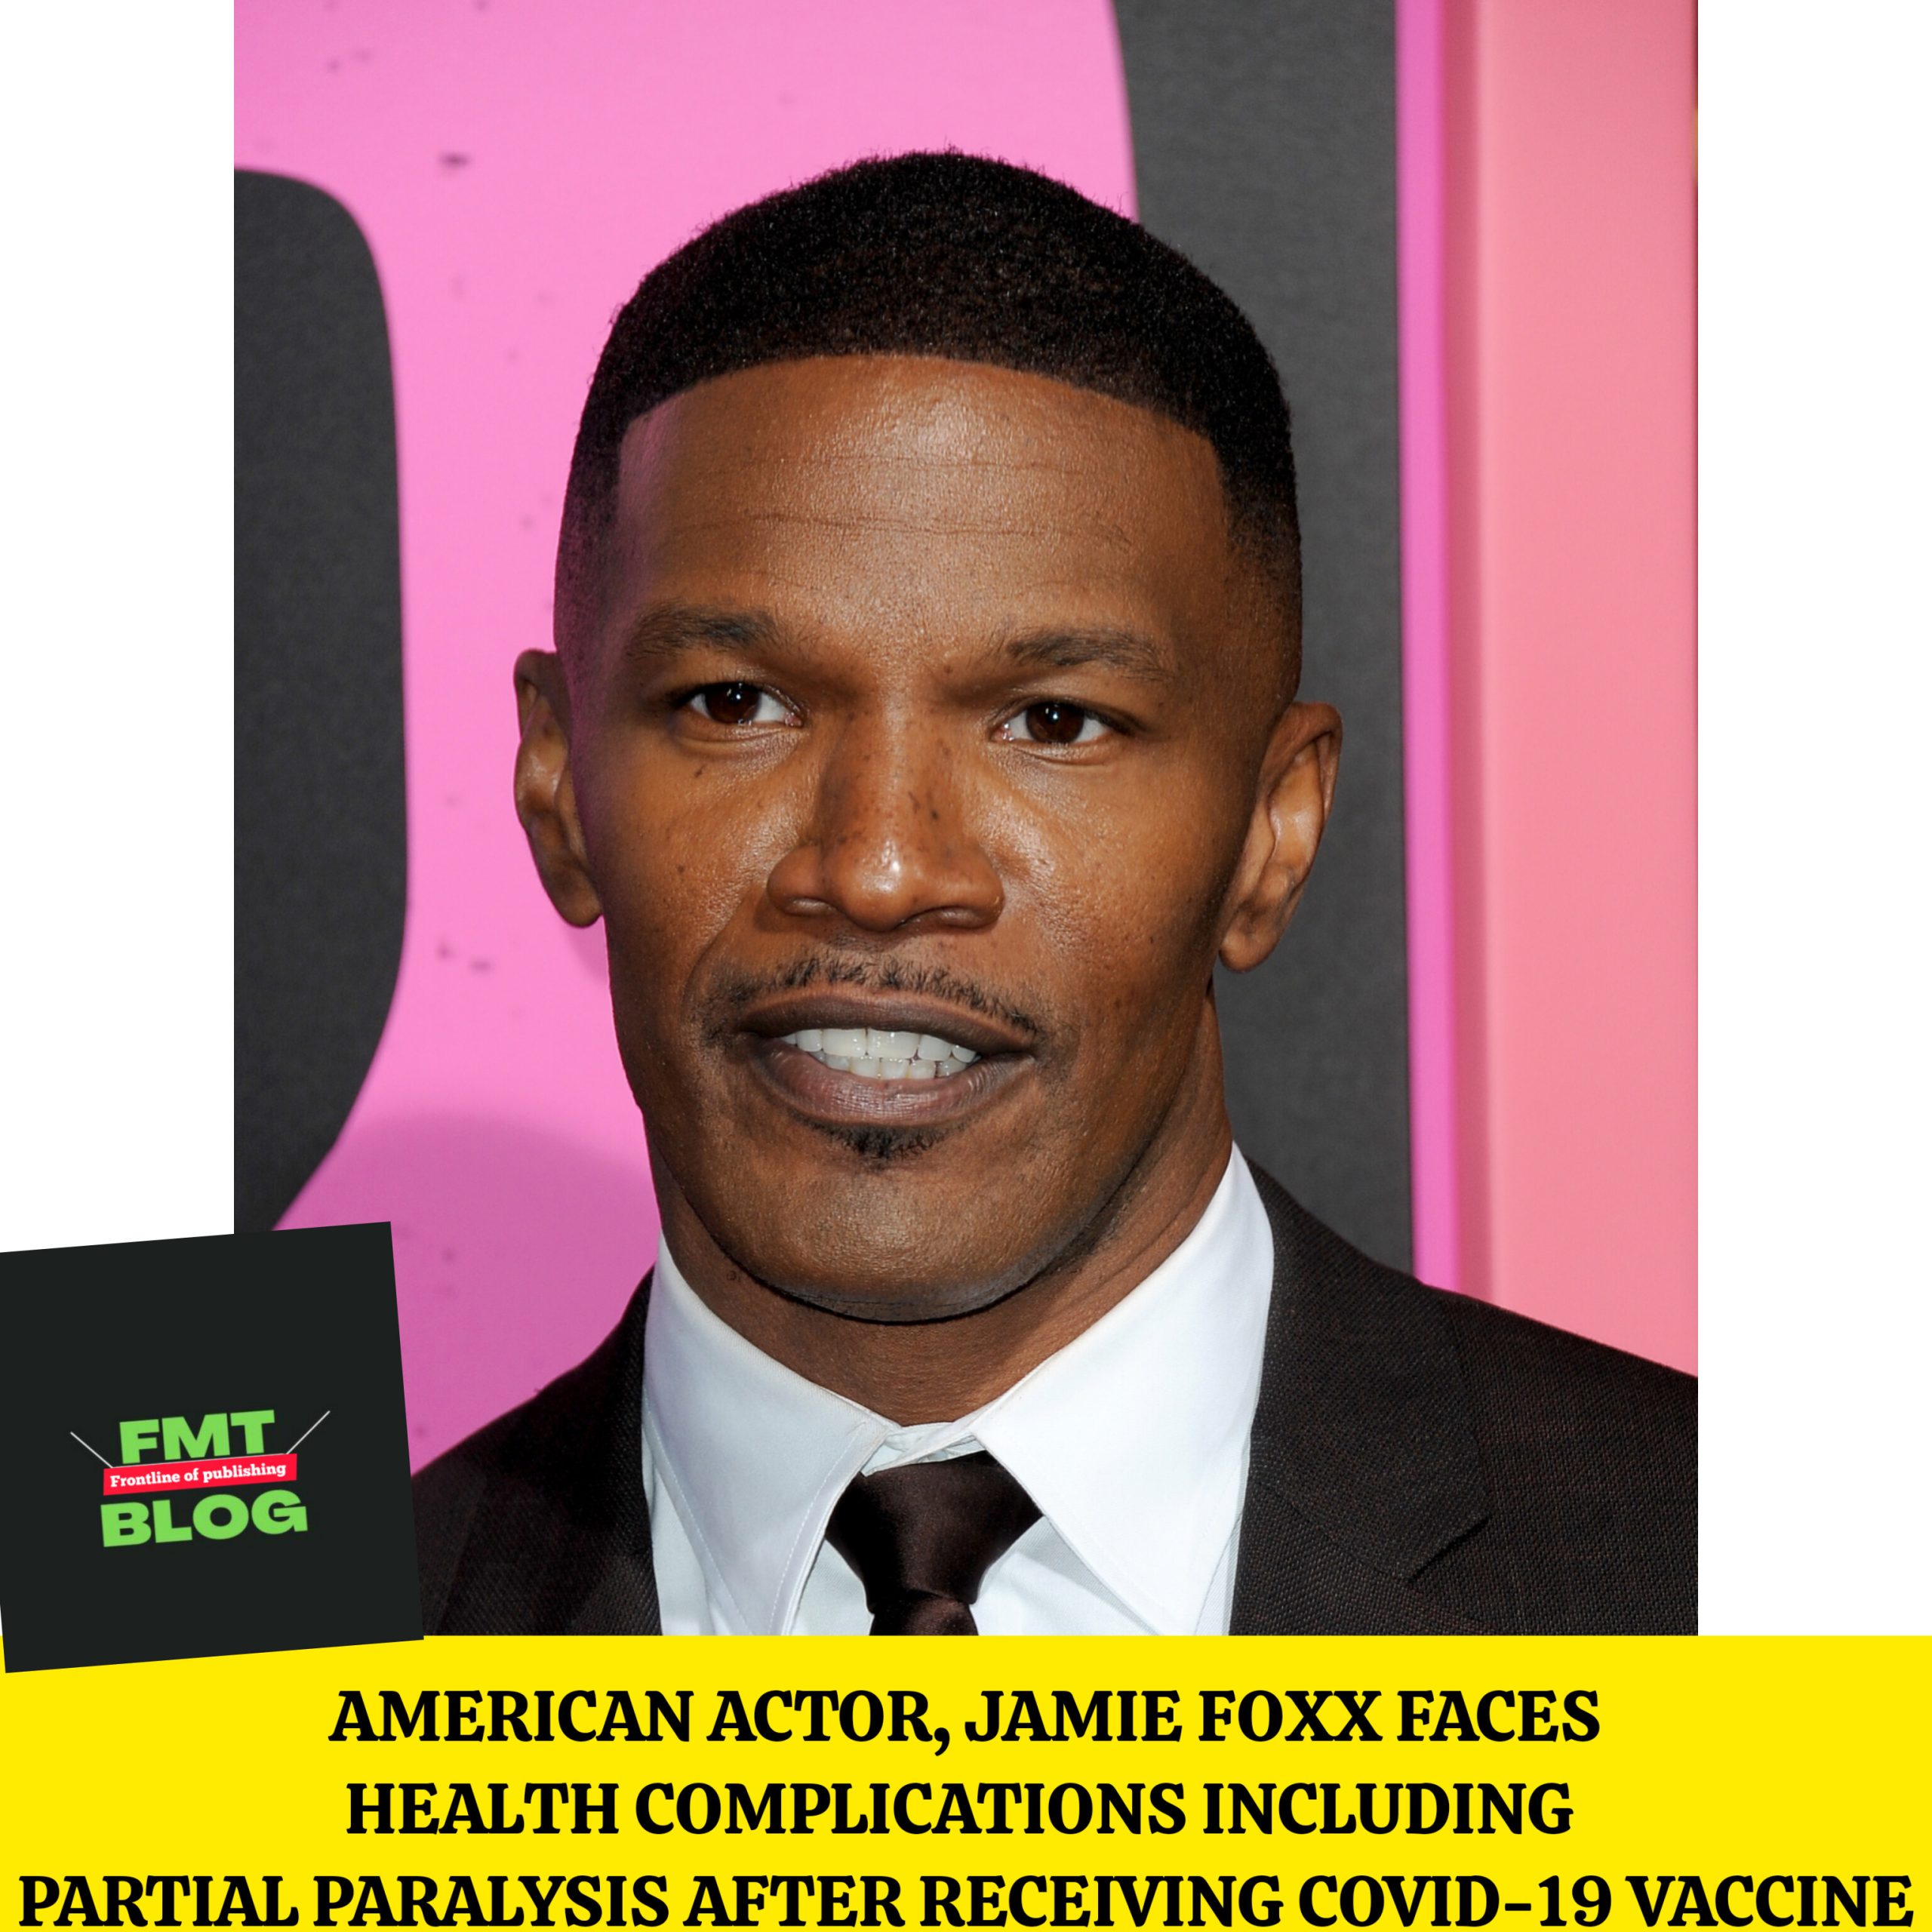 American Actor Jamie Foxx Faces Health Complications Including Partial Paralysis after receiving COVID-19 VACCINE